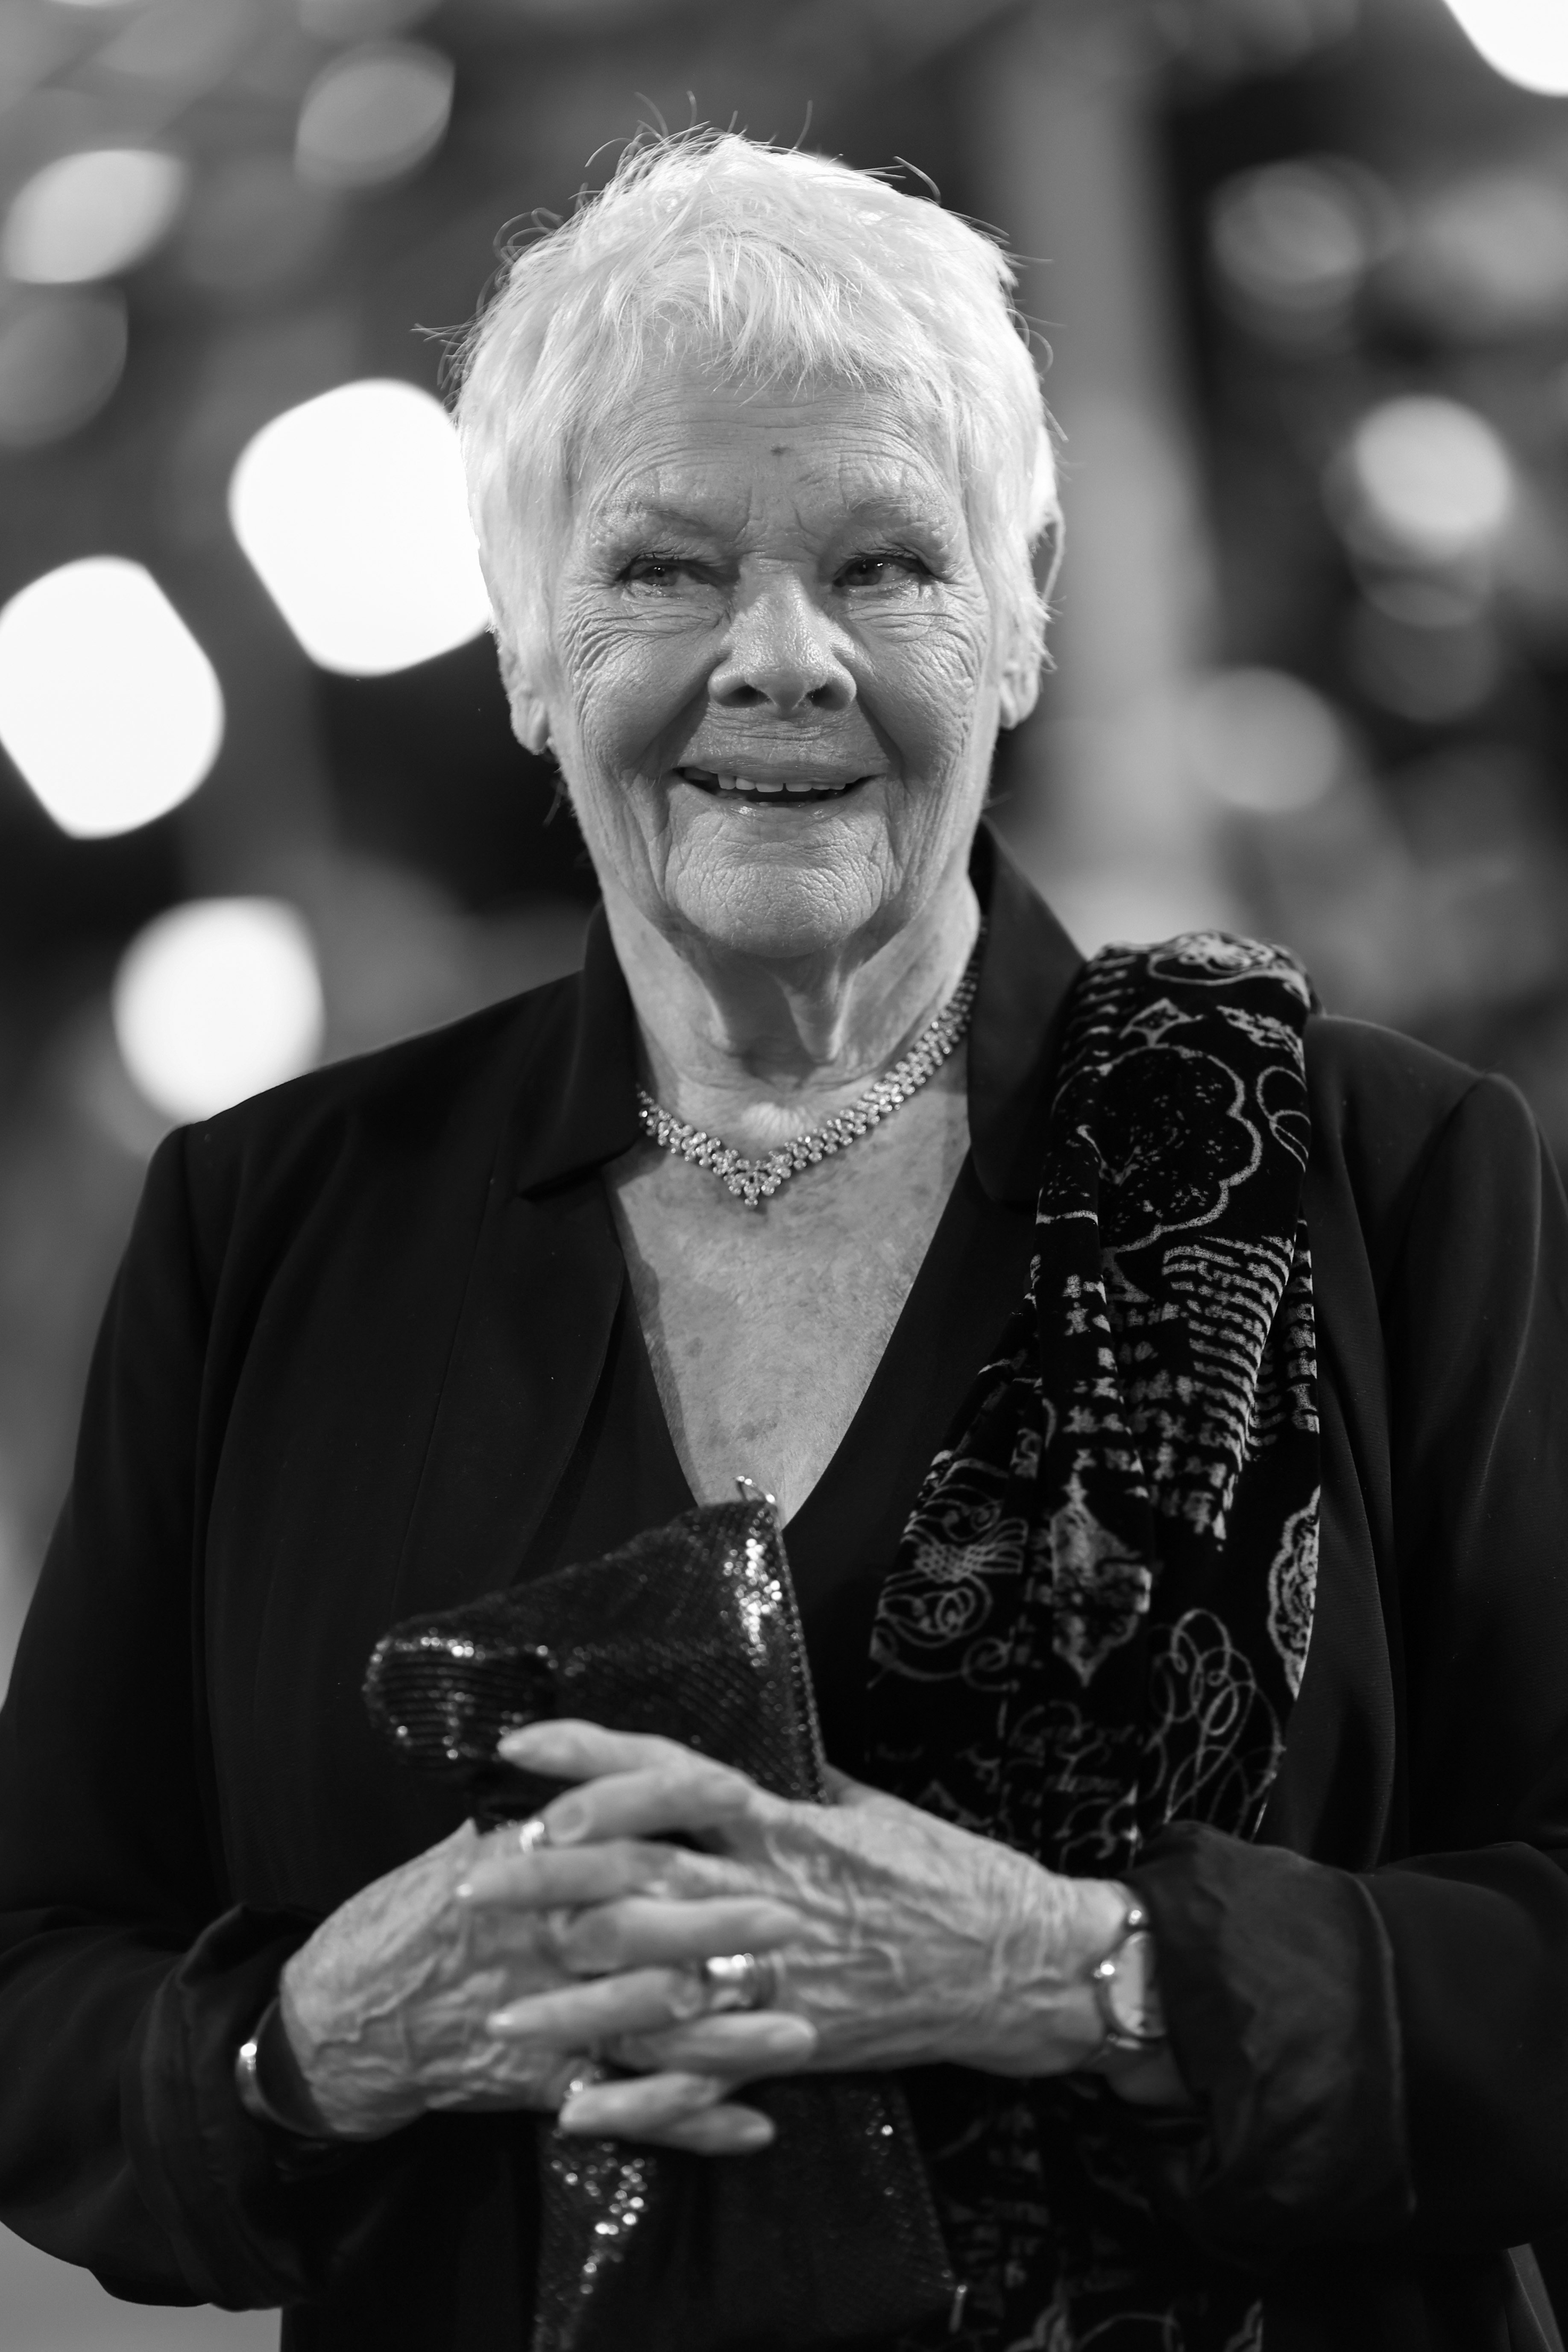 Dame Judi Dench attends the "Allelujah" European Premiere during the 66th BFI London Film Festival at Southbank Centre on October 09, 2022 in London, England. | Source: Getty Images